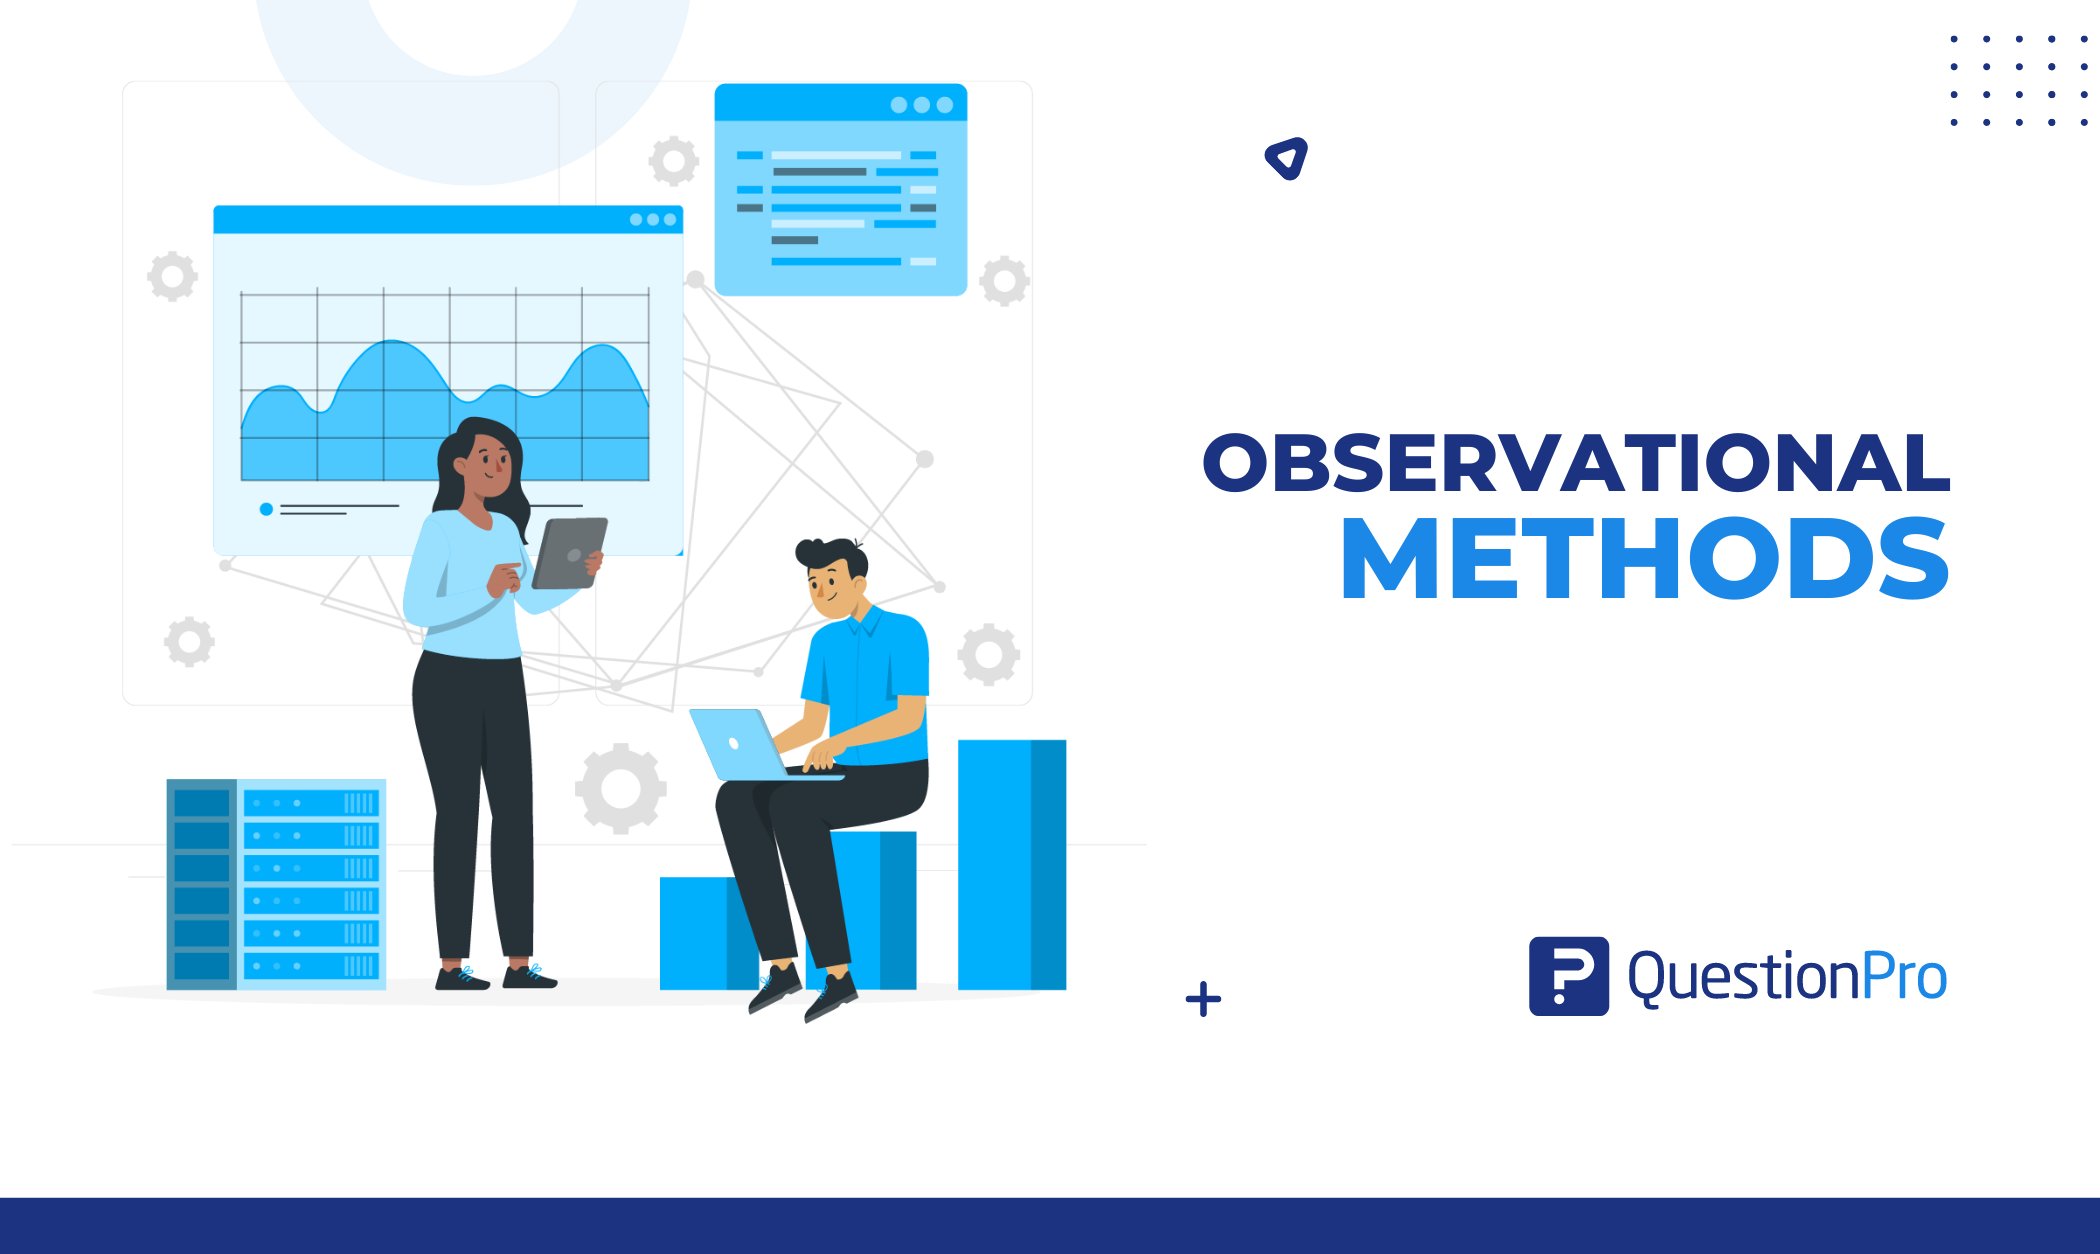 Discover the power of observational methods in gaining profound insights through real-world actions. Unlock a new perspective today!